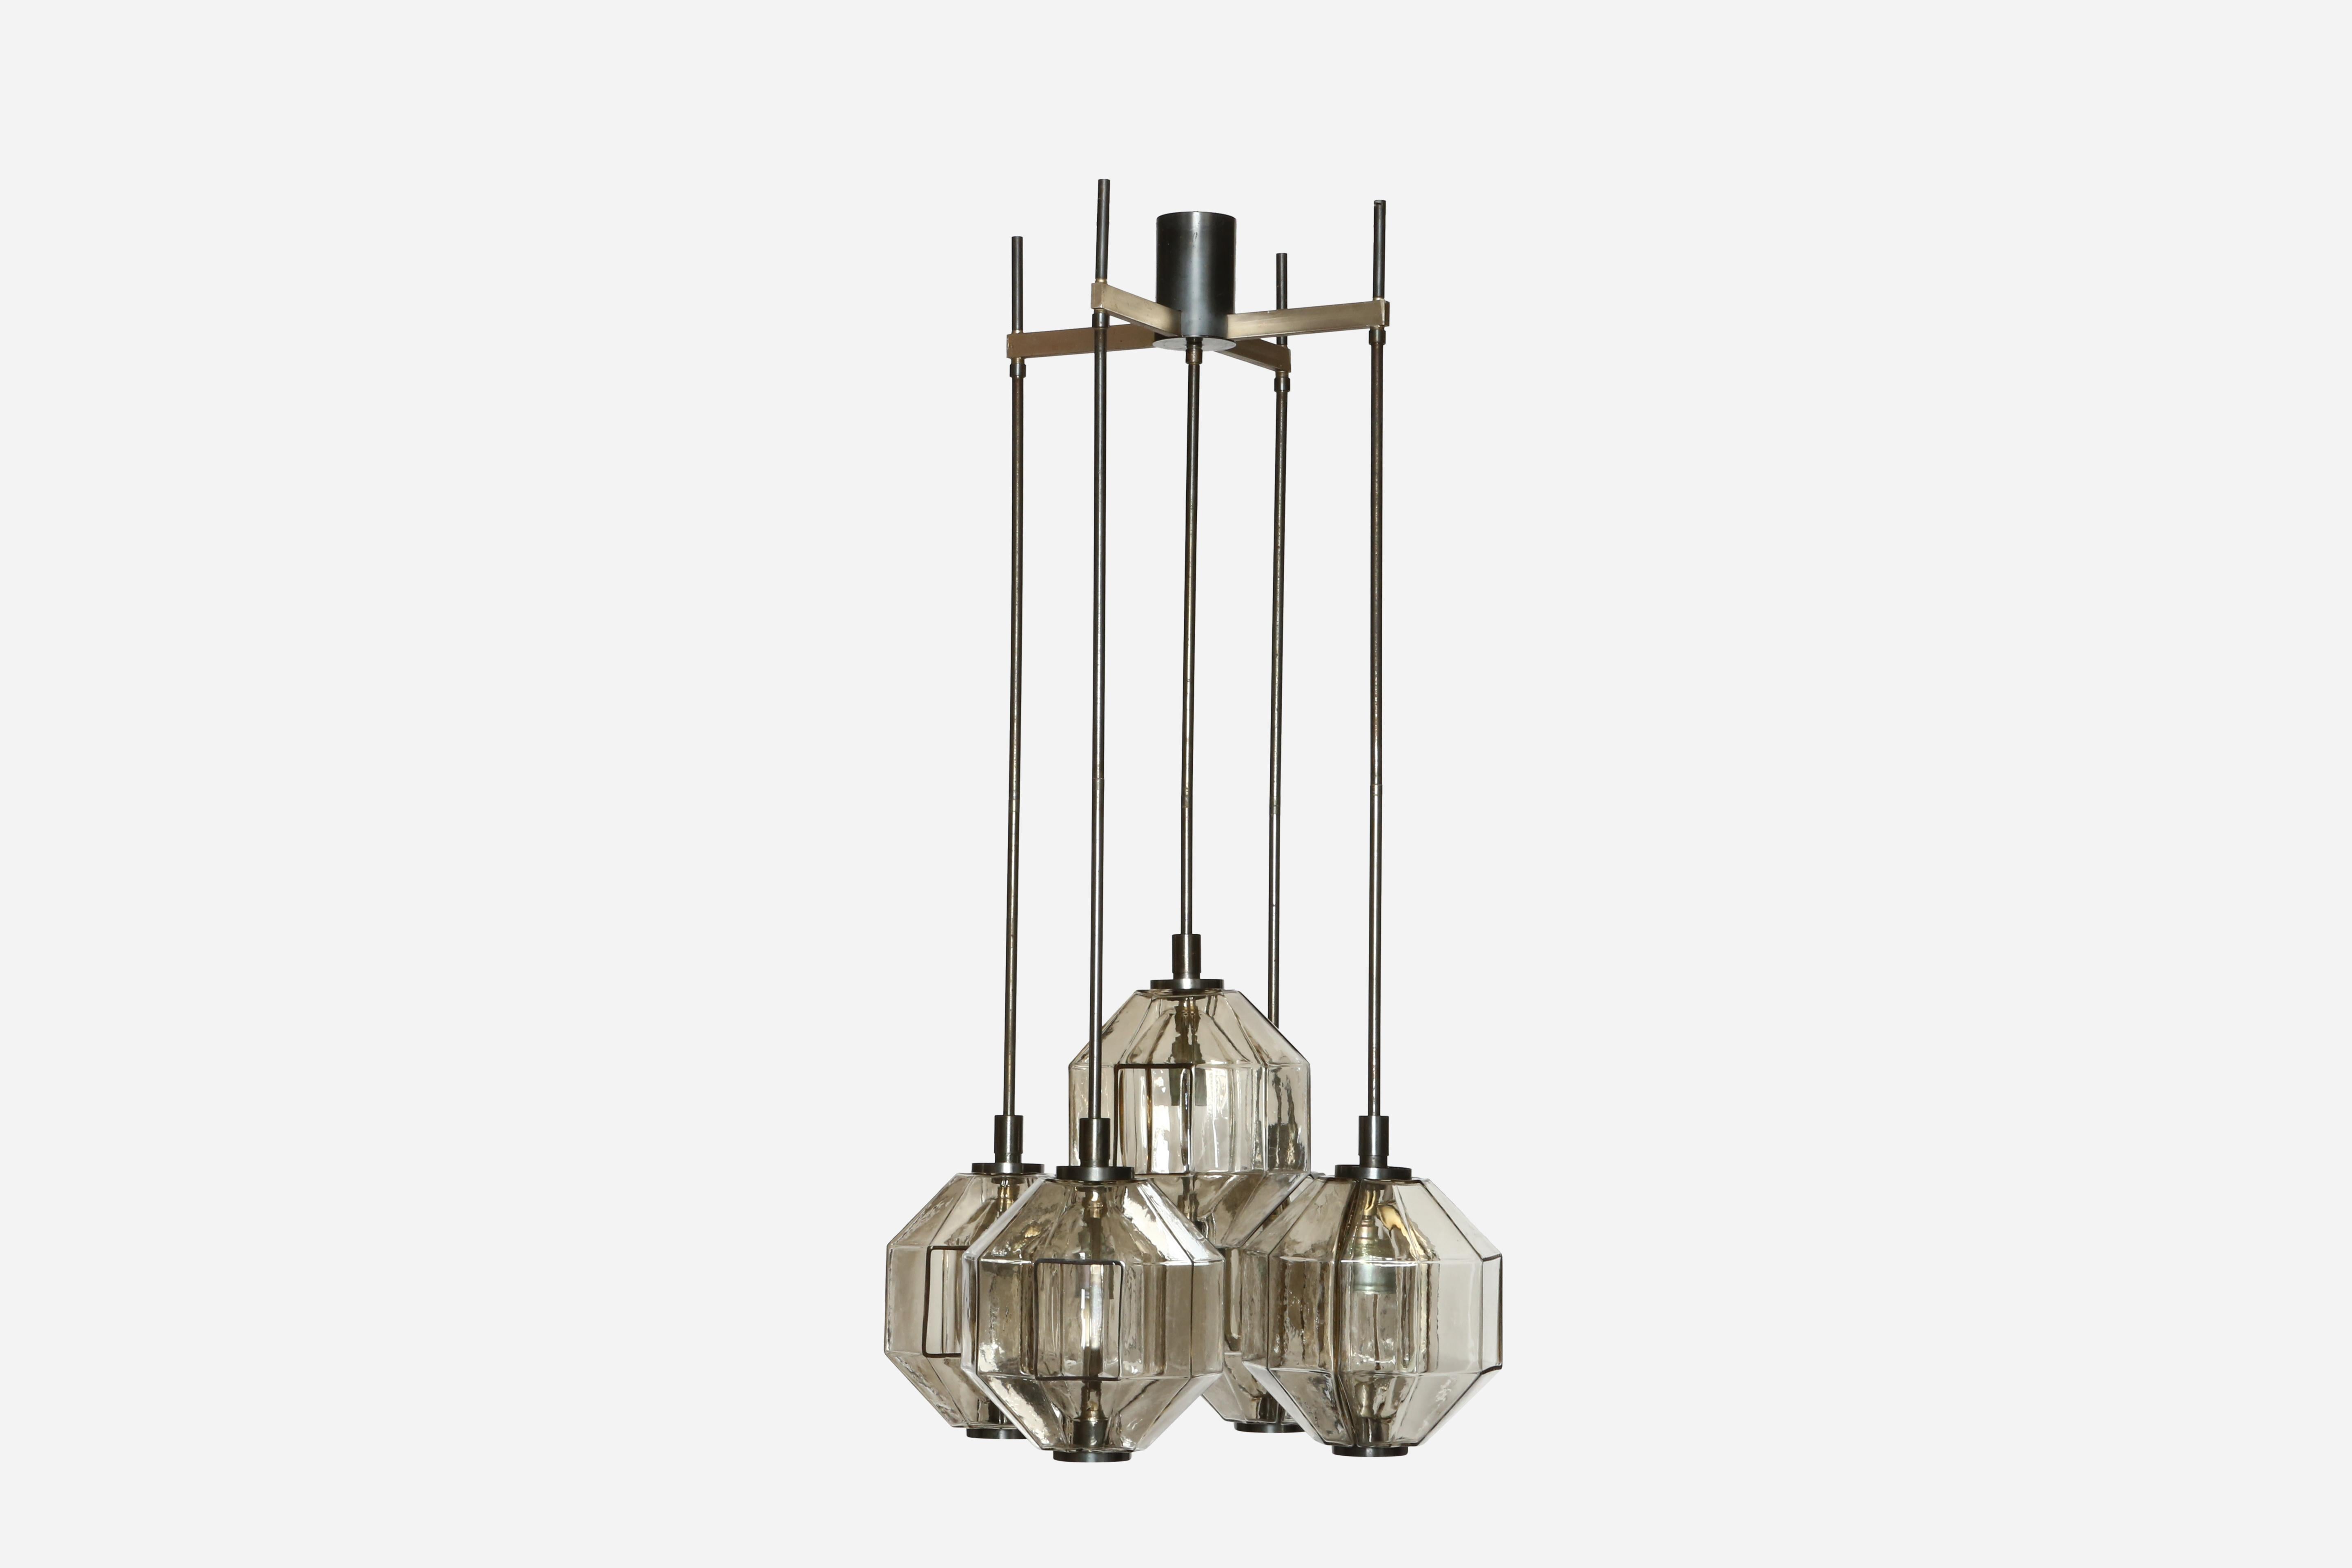 Vinicio Vianello for Vistosi chandelier.
Designed and manufactured in Italy in 1960s.
Five Murano glass spheres on patinated brass frame.
Complimentary US rewiring upon request.

We take pride in bringing vintage fixtures to their full glory